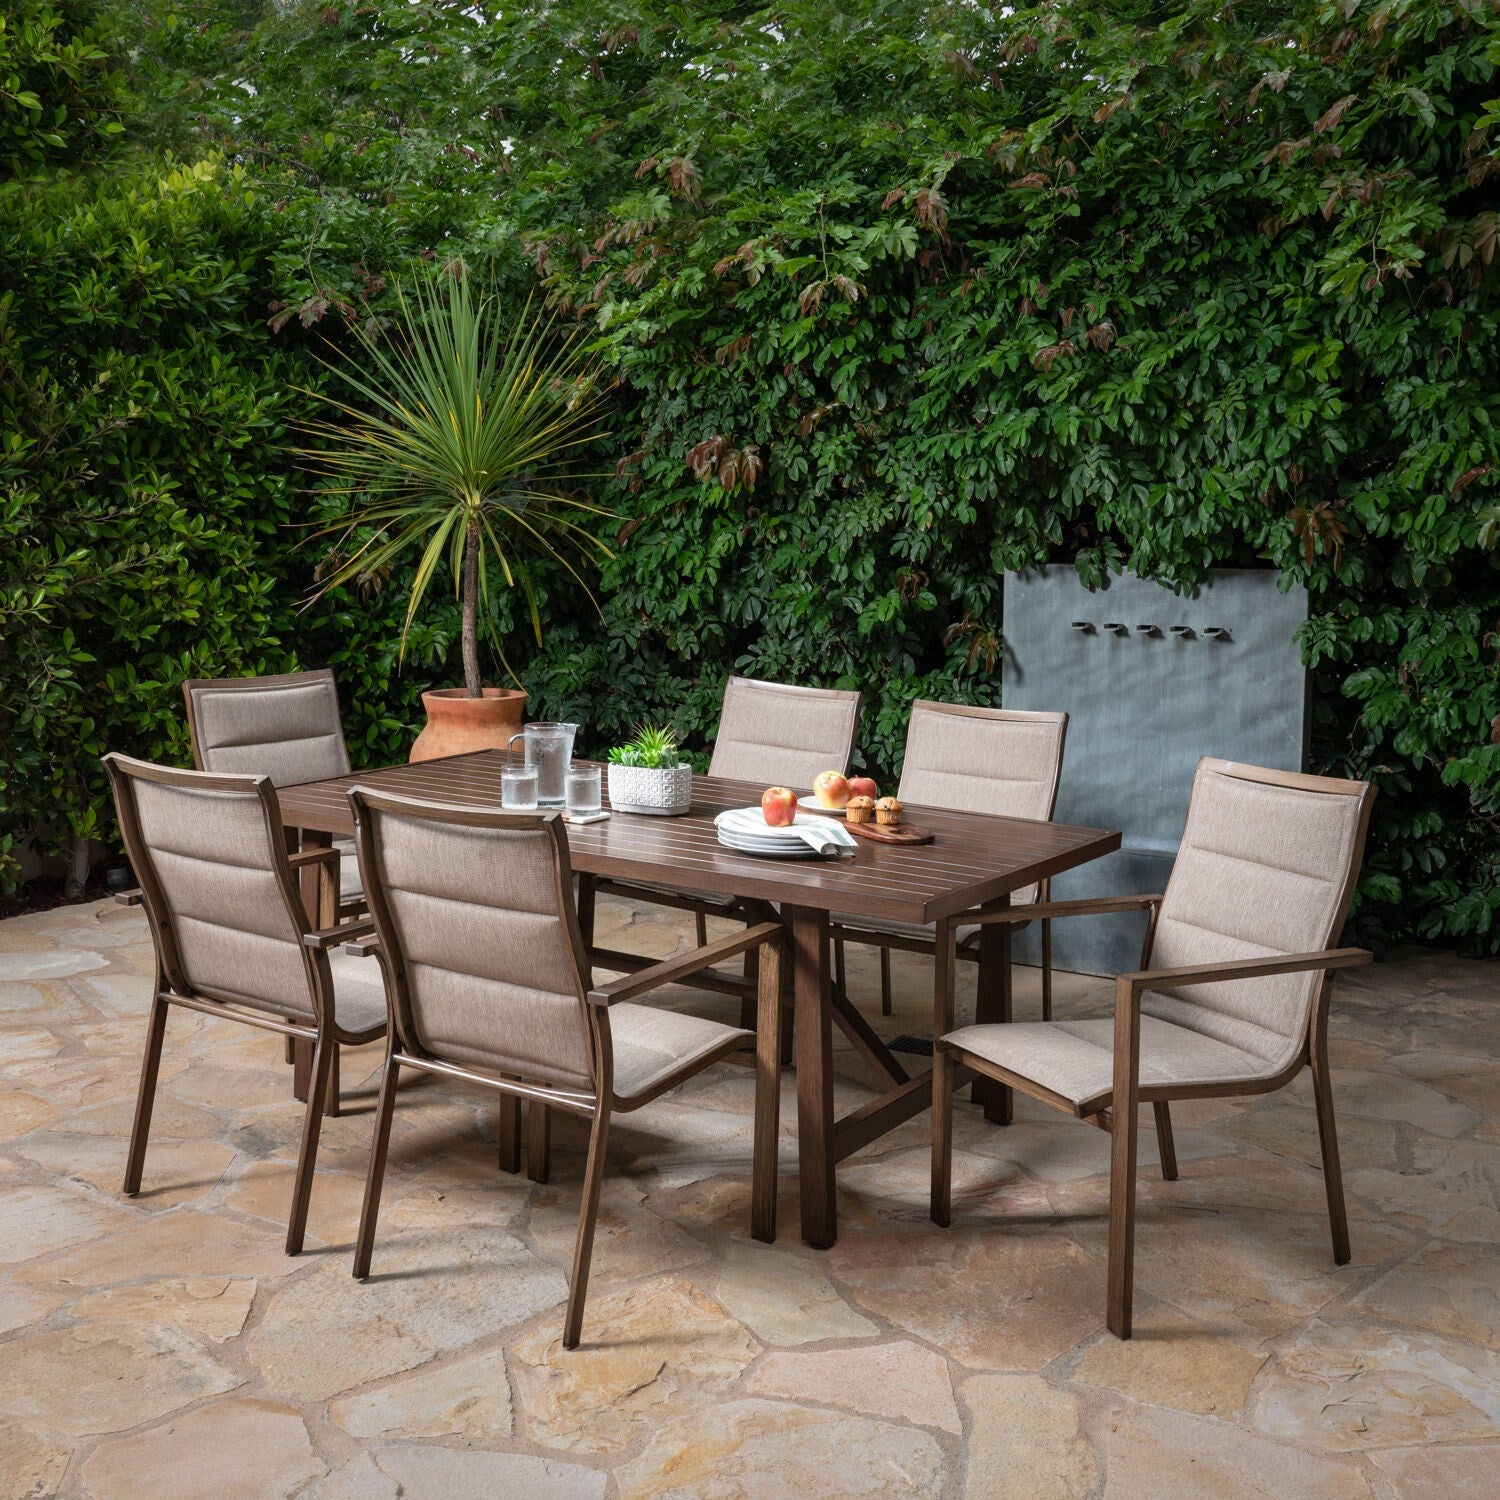 Fairhope 7-Piece Outdoor Dining Set with 6 Padded Contoured-Sling Chairs and a 74-In. x 40-In. Trestle Table, Tan